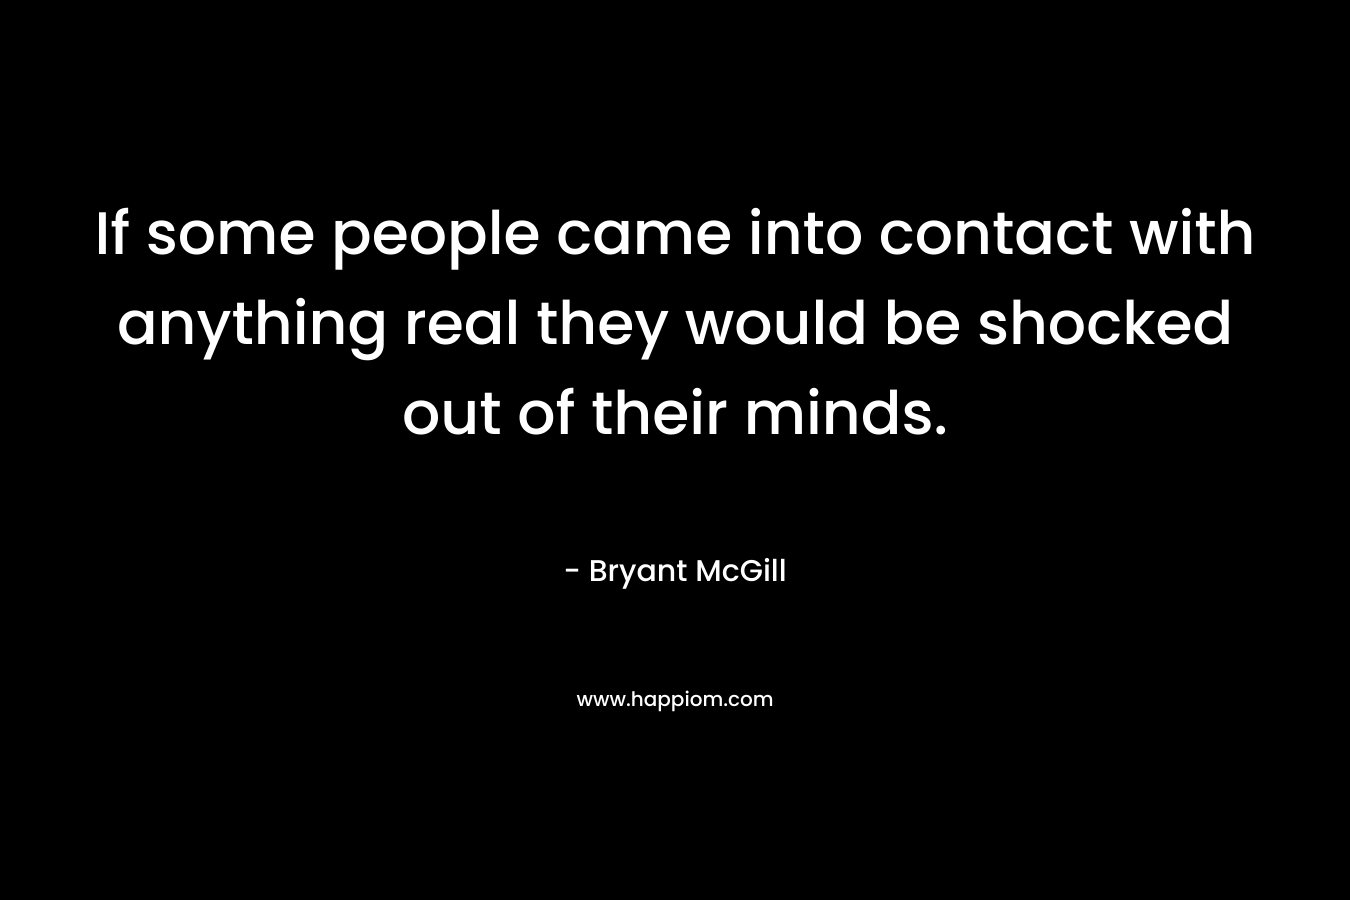 If some people came into contact with anything real they would be shocked out of their minds. – Bryant McGill